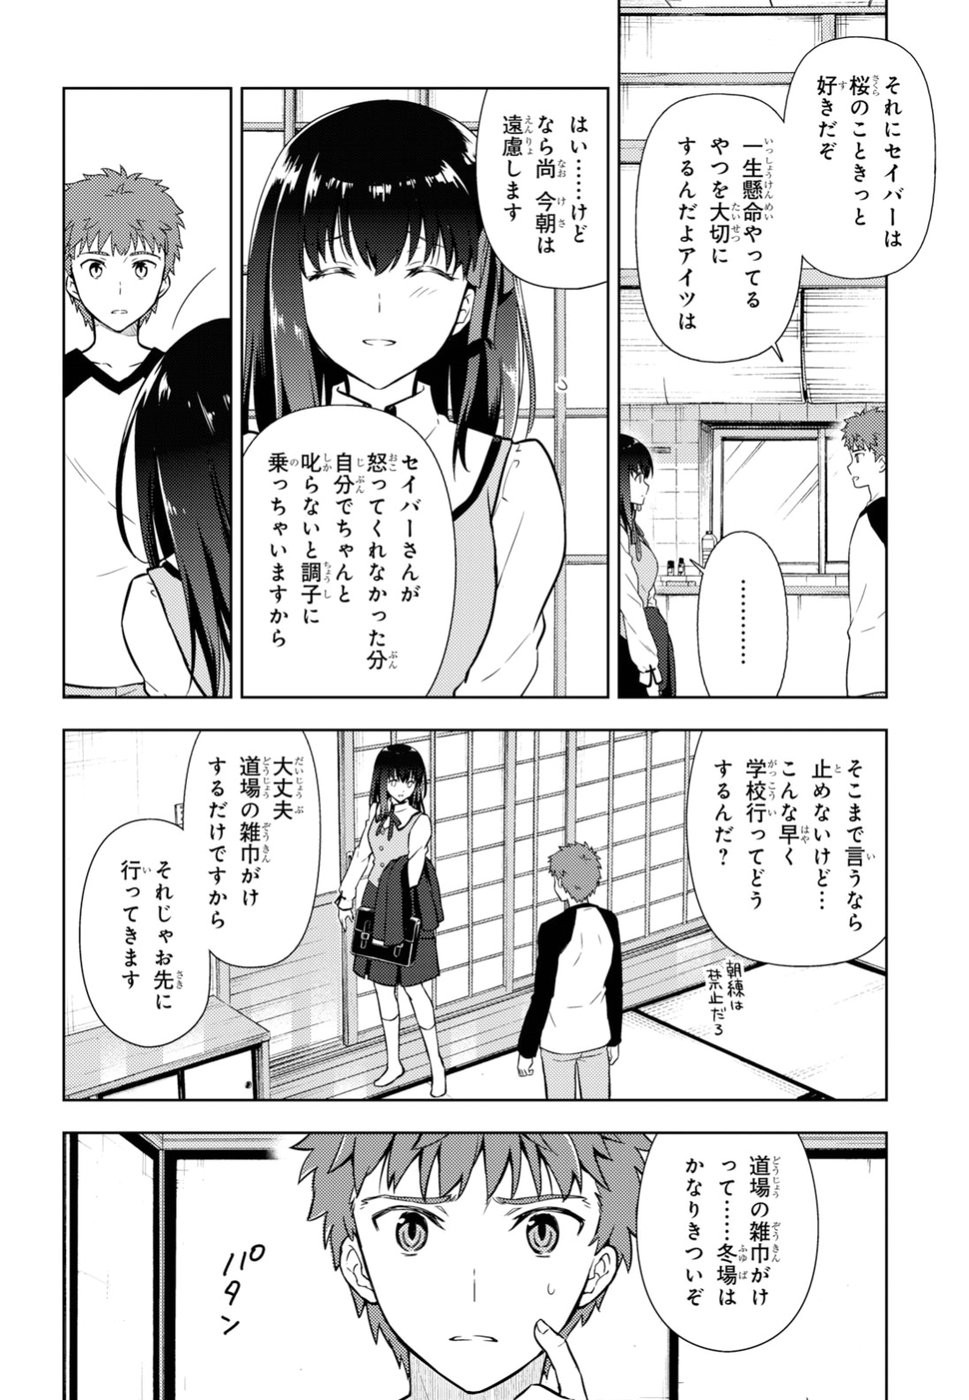 Fate/Stay night Heaven's Feel - Chapter 48 - Page 4